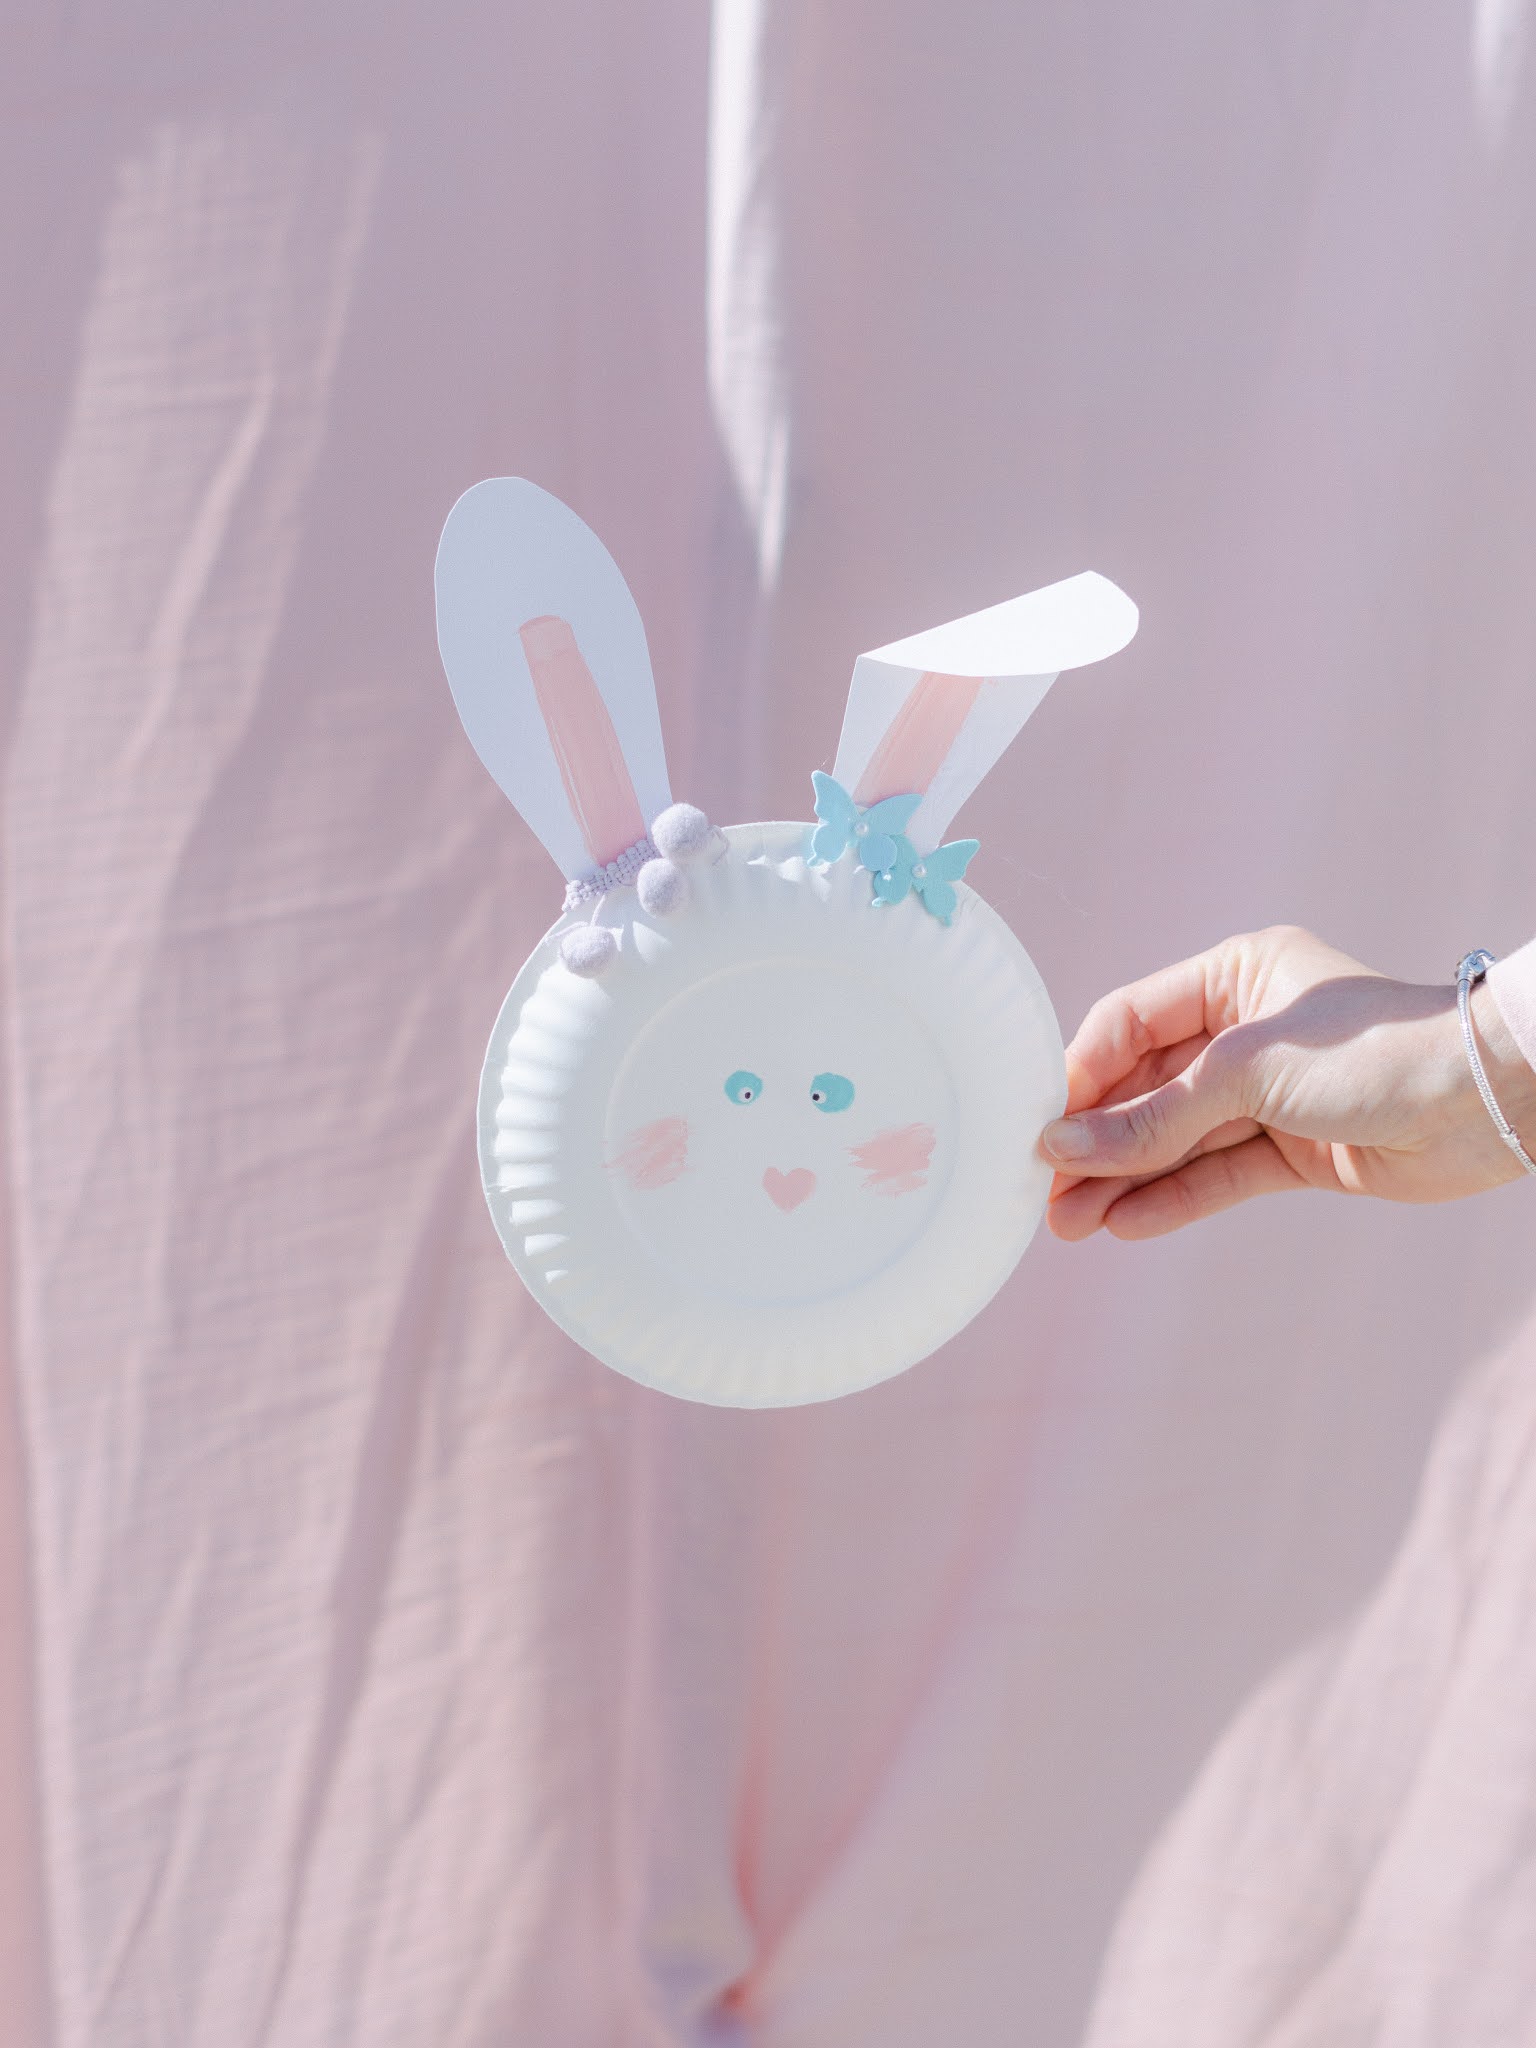 Paper bunny plate craft is a whimsical Easter craft